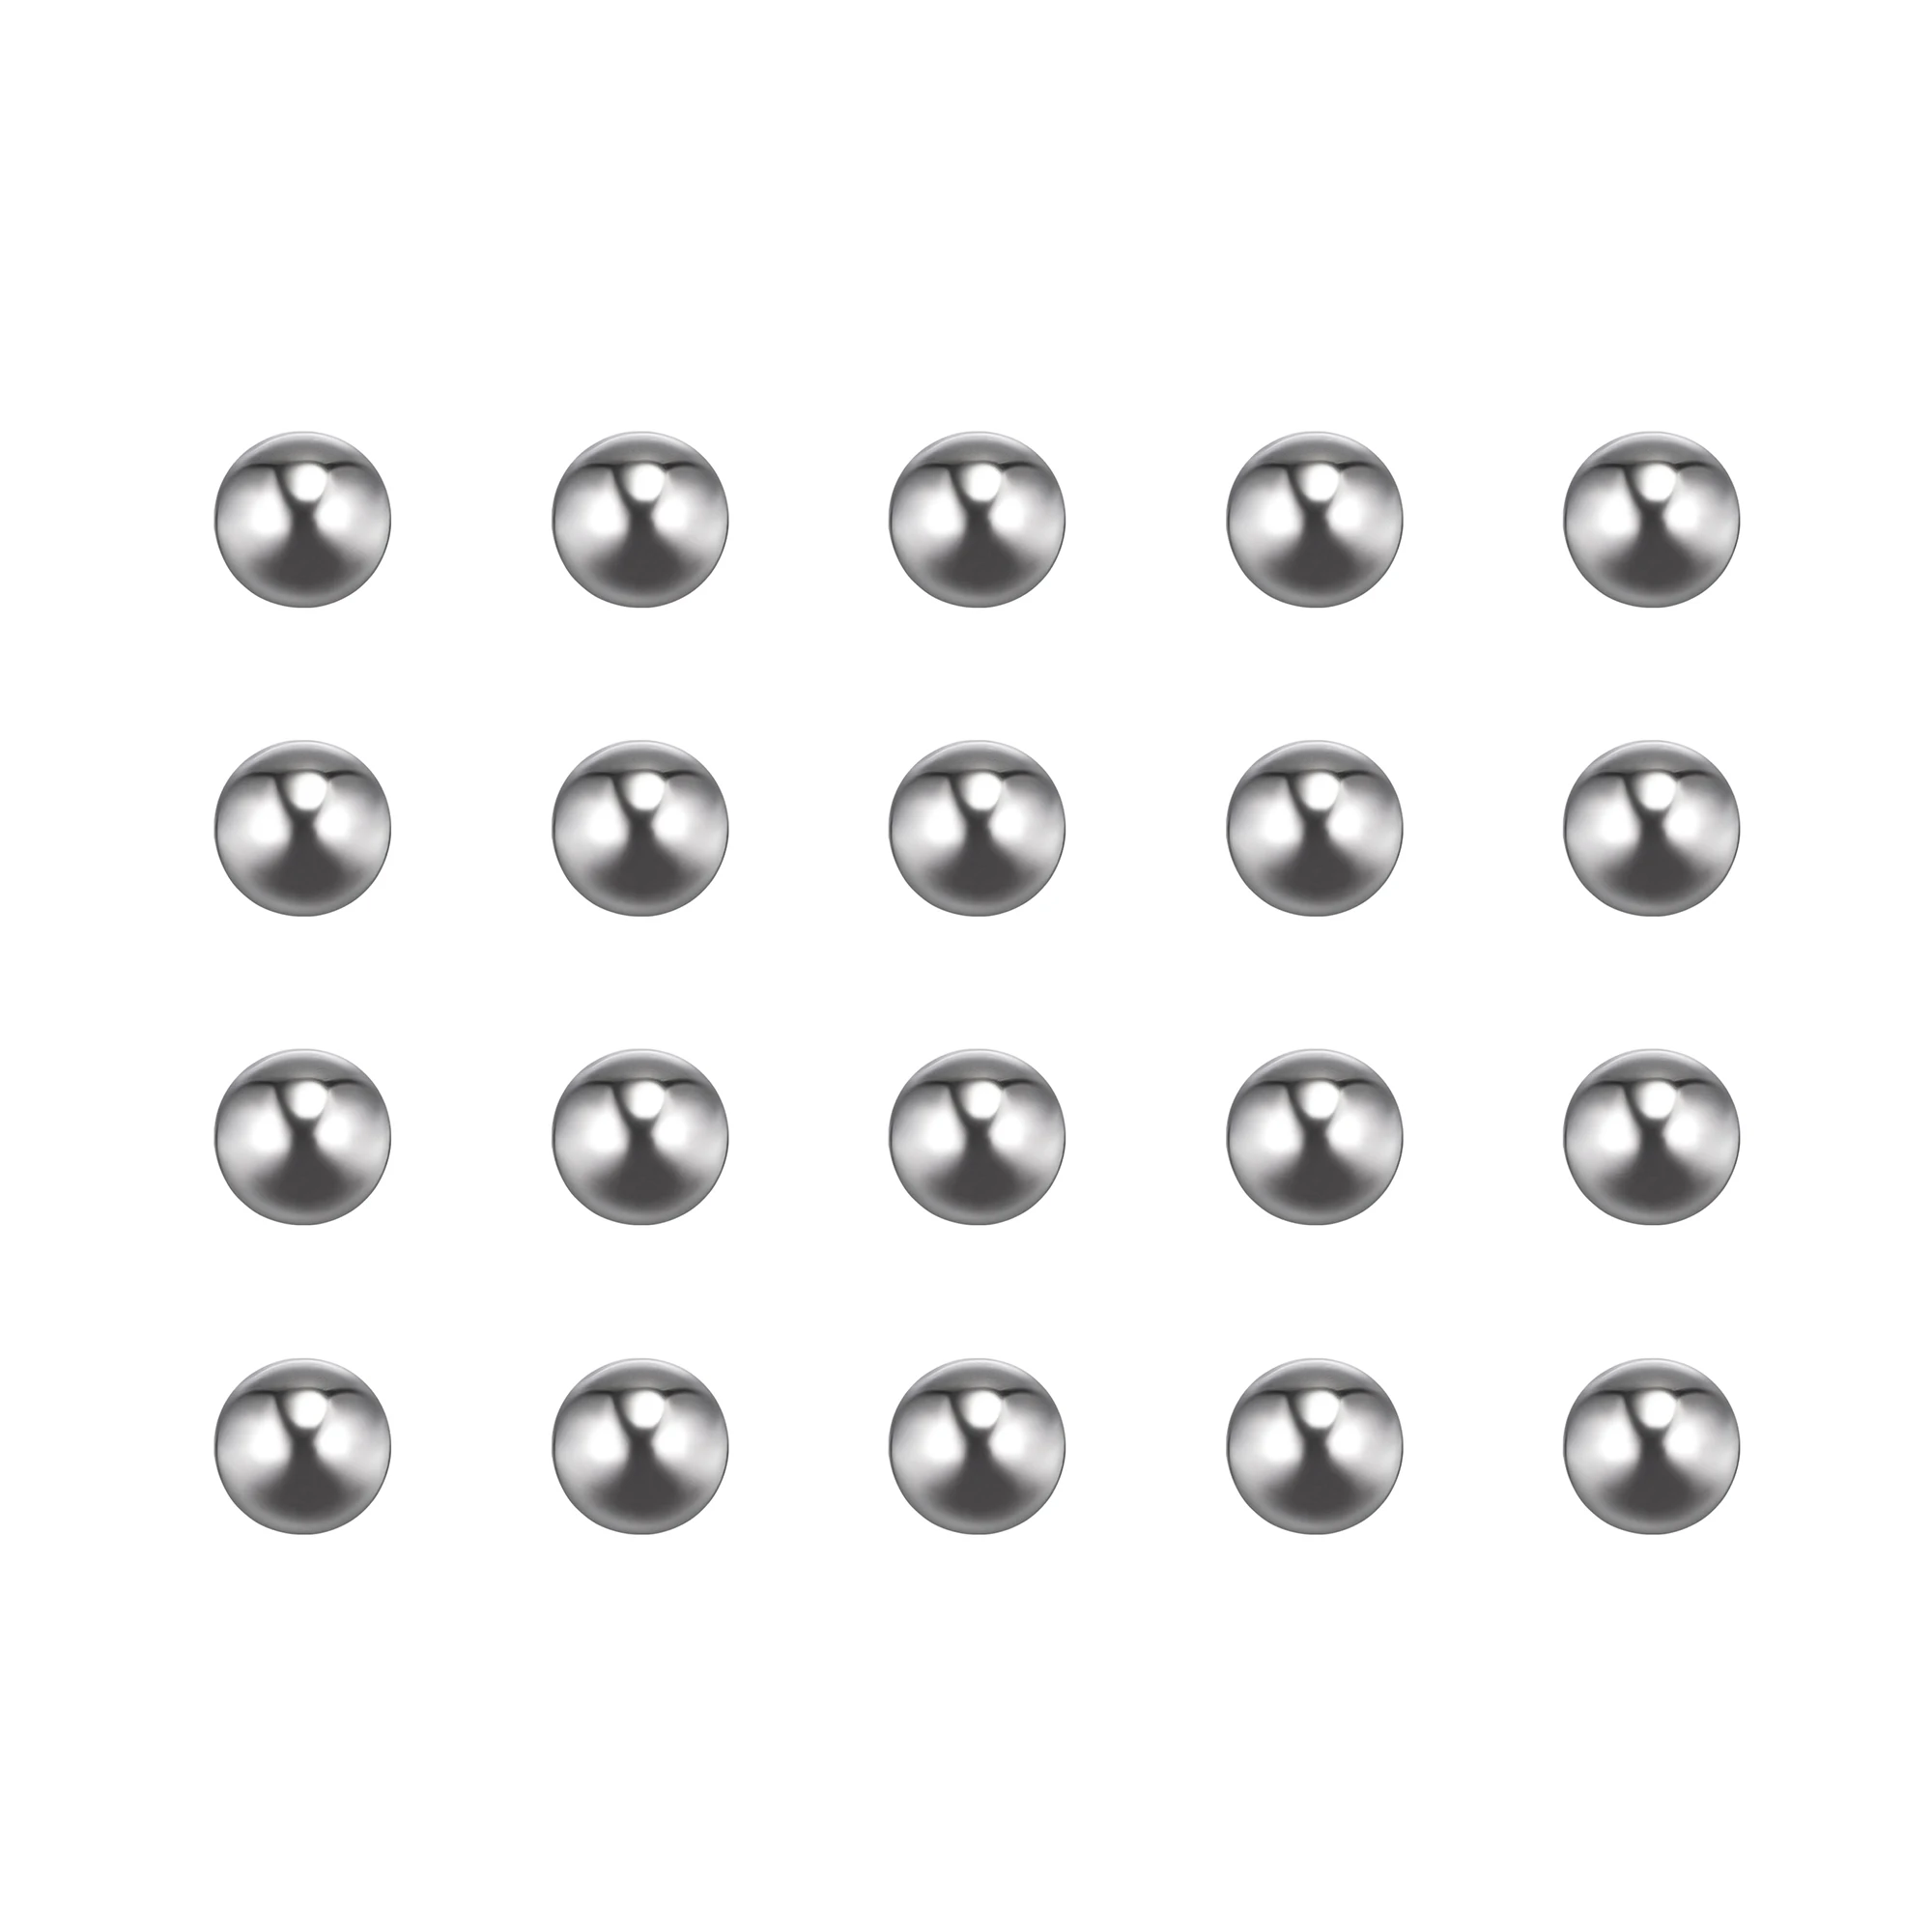 

Uxcell 300pcs 5mm 201 Stainless Steel Bearing Balls G200 Precision